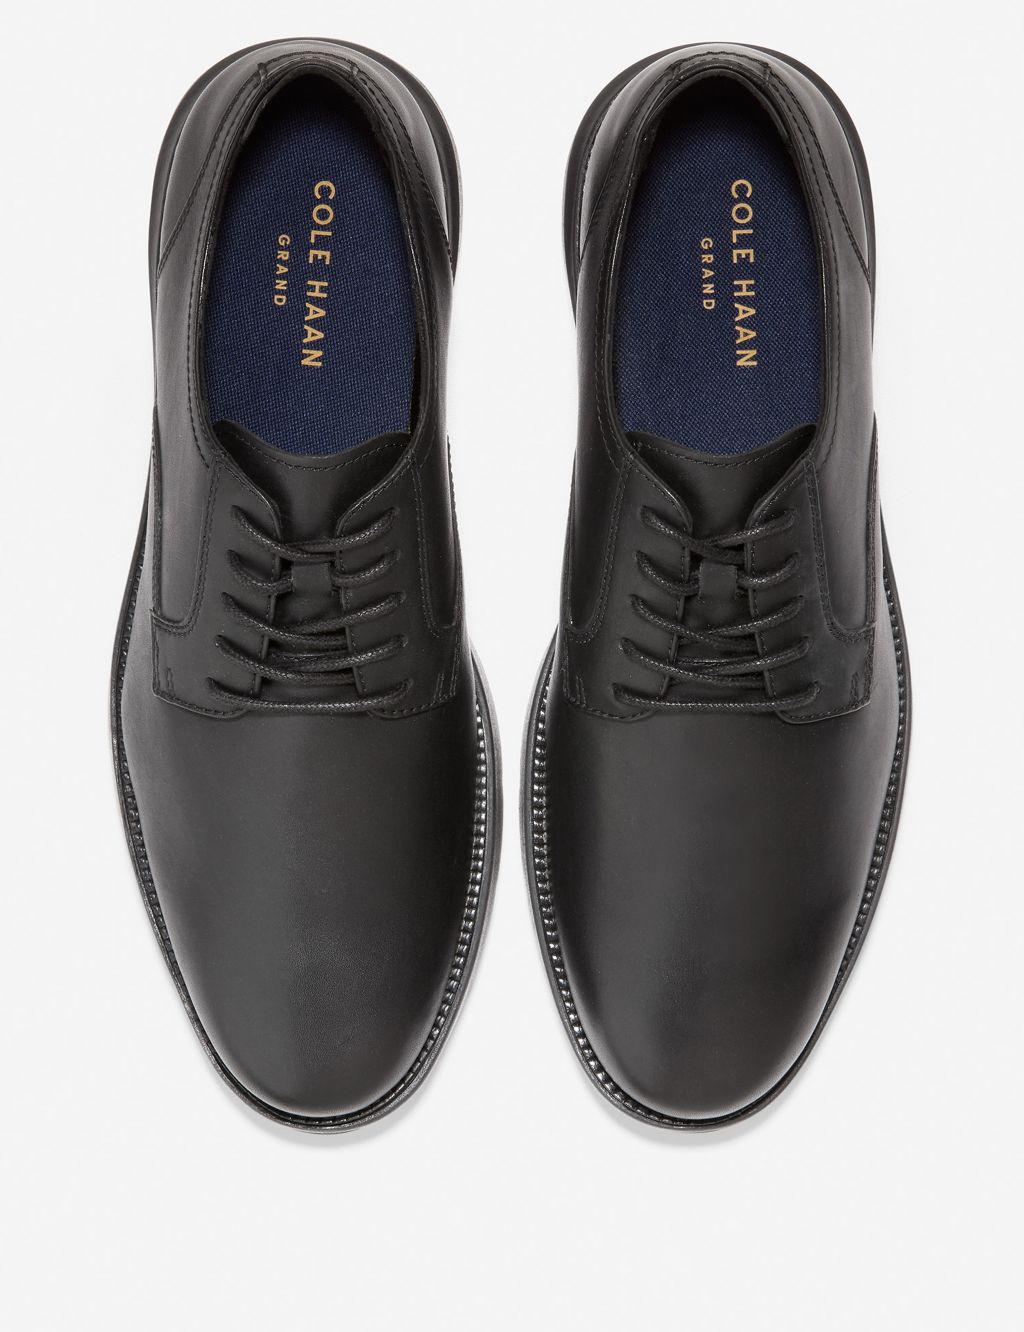 Grand Atlantic Leather Oxford Shoes image 3